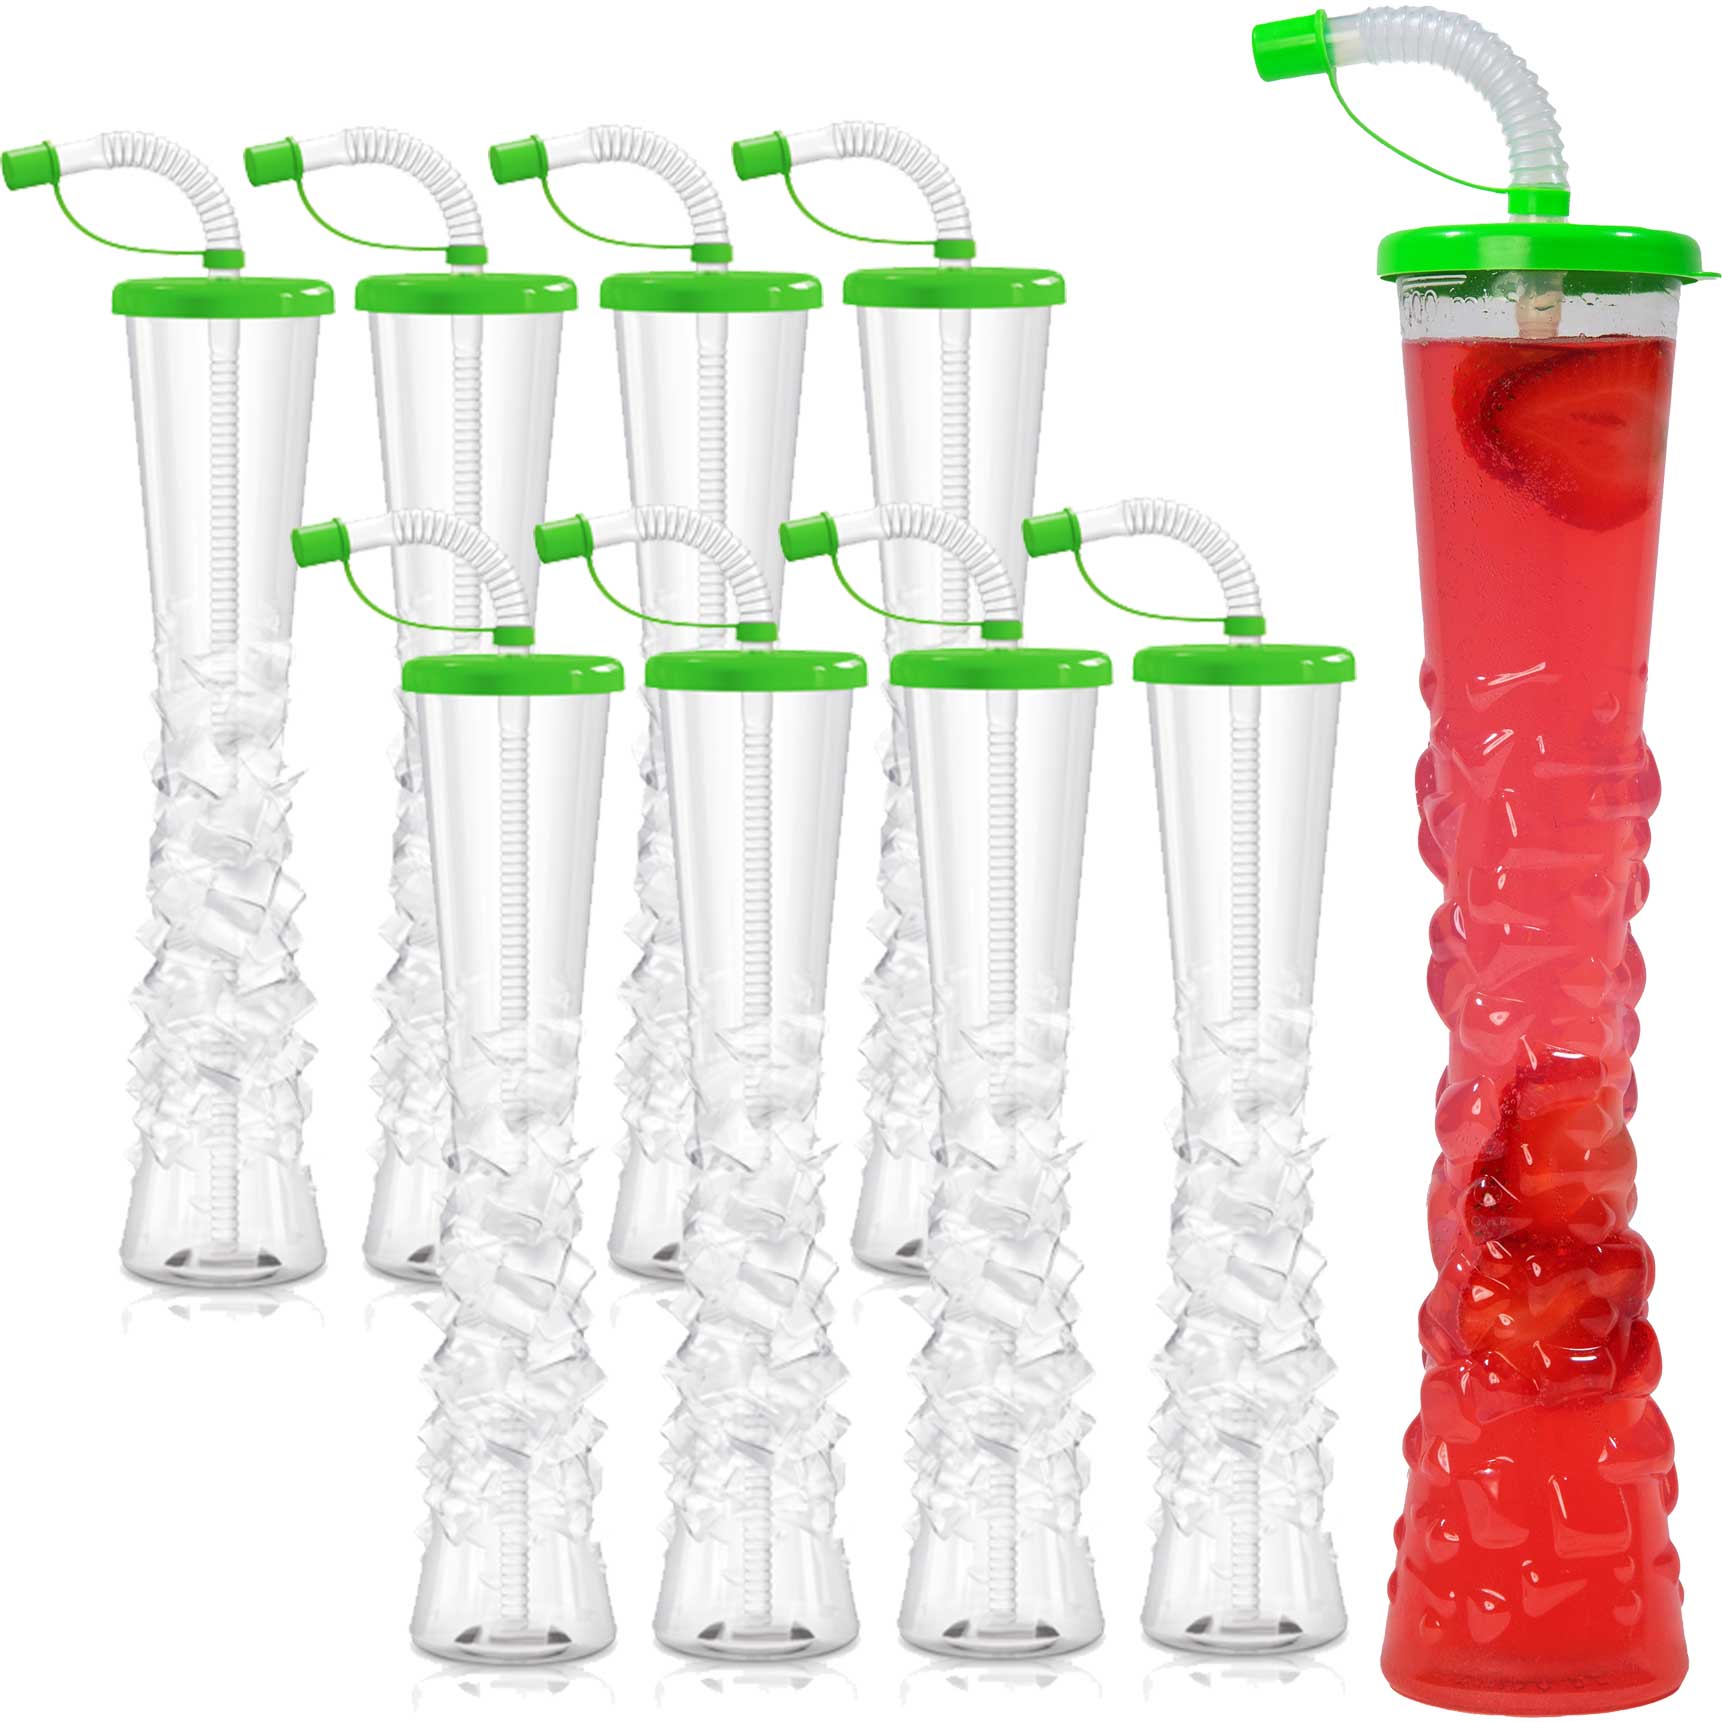 Sweet World USA Yard Cups Ice Yard Cups (54 Cups - Lime) - for Margaritas and Frozen Drinks, Kids Parties - 17oz. (500ml) cups with lids and straws